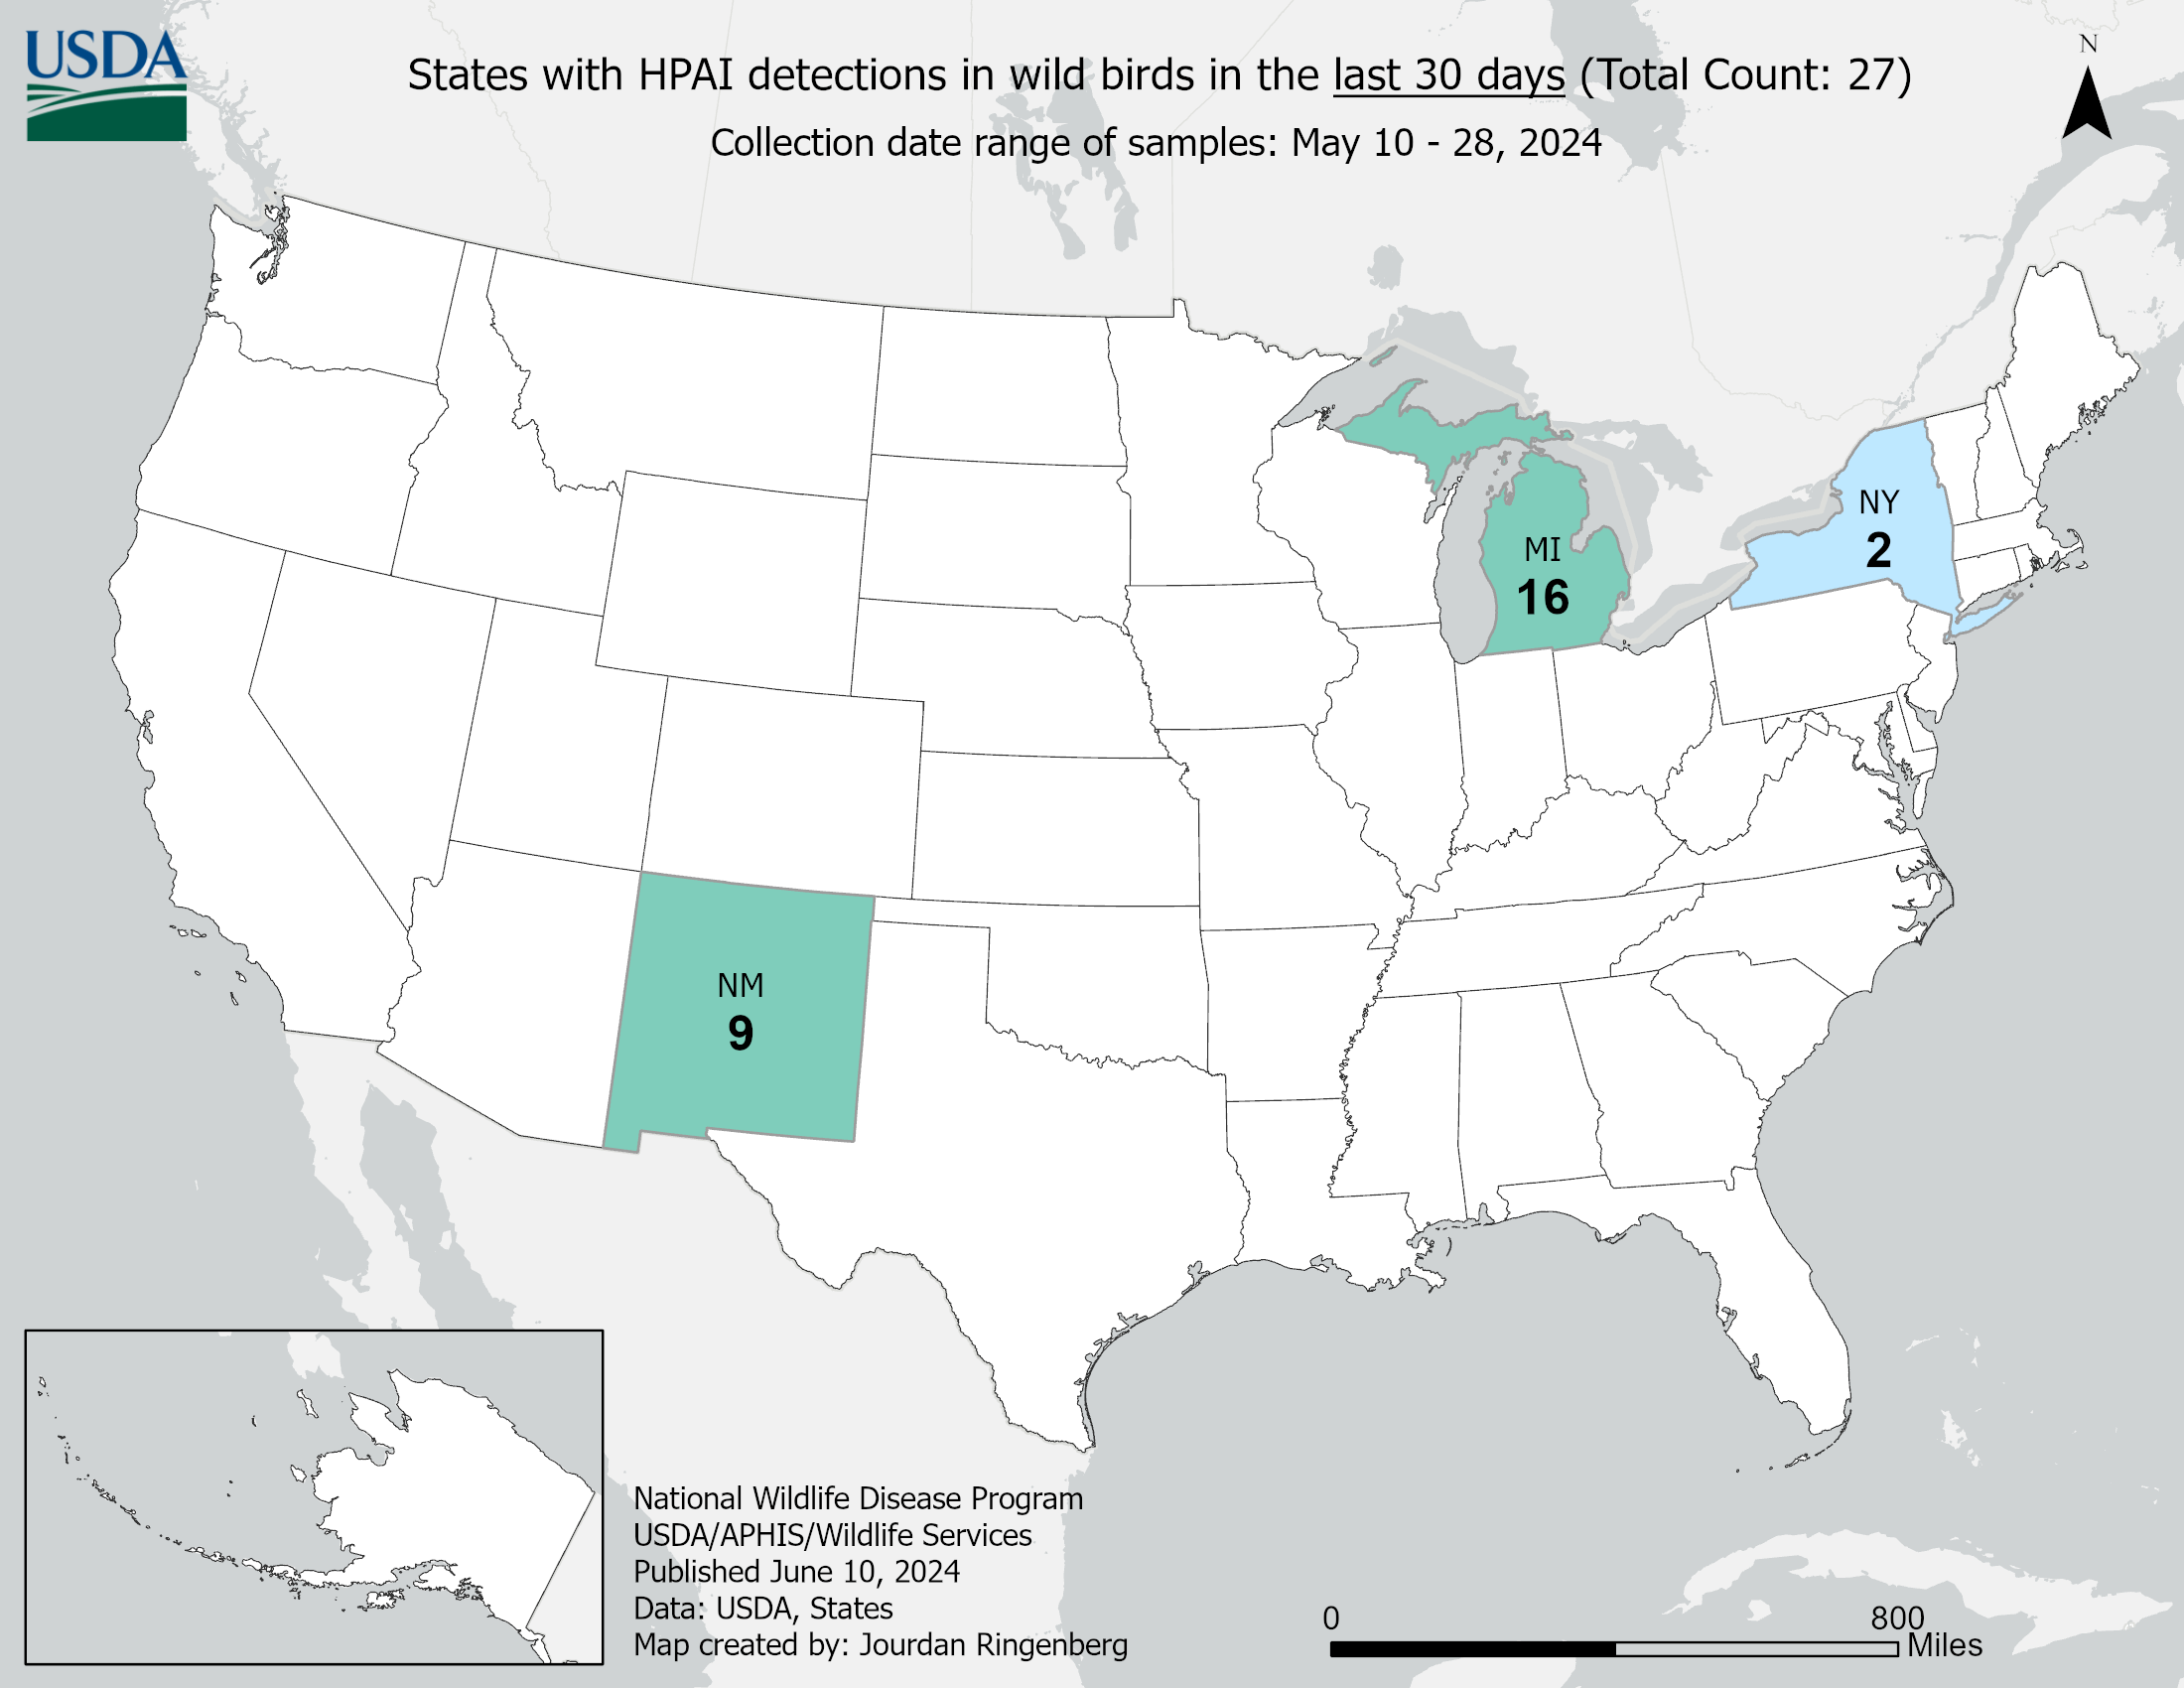 map showing States with HPAI detections in wild birds in the last 30 days